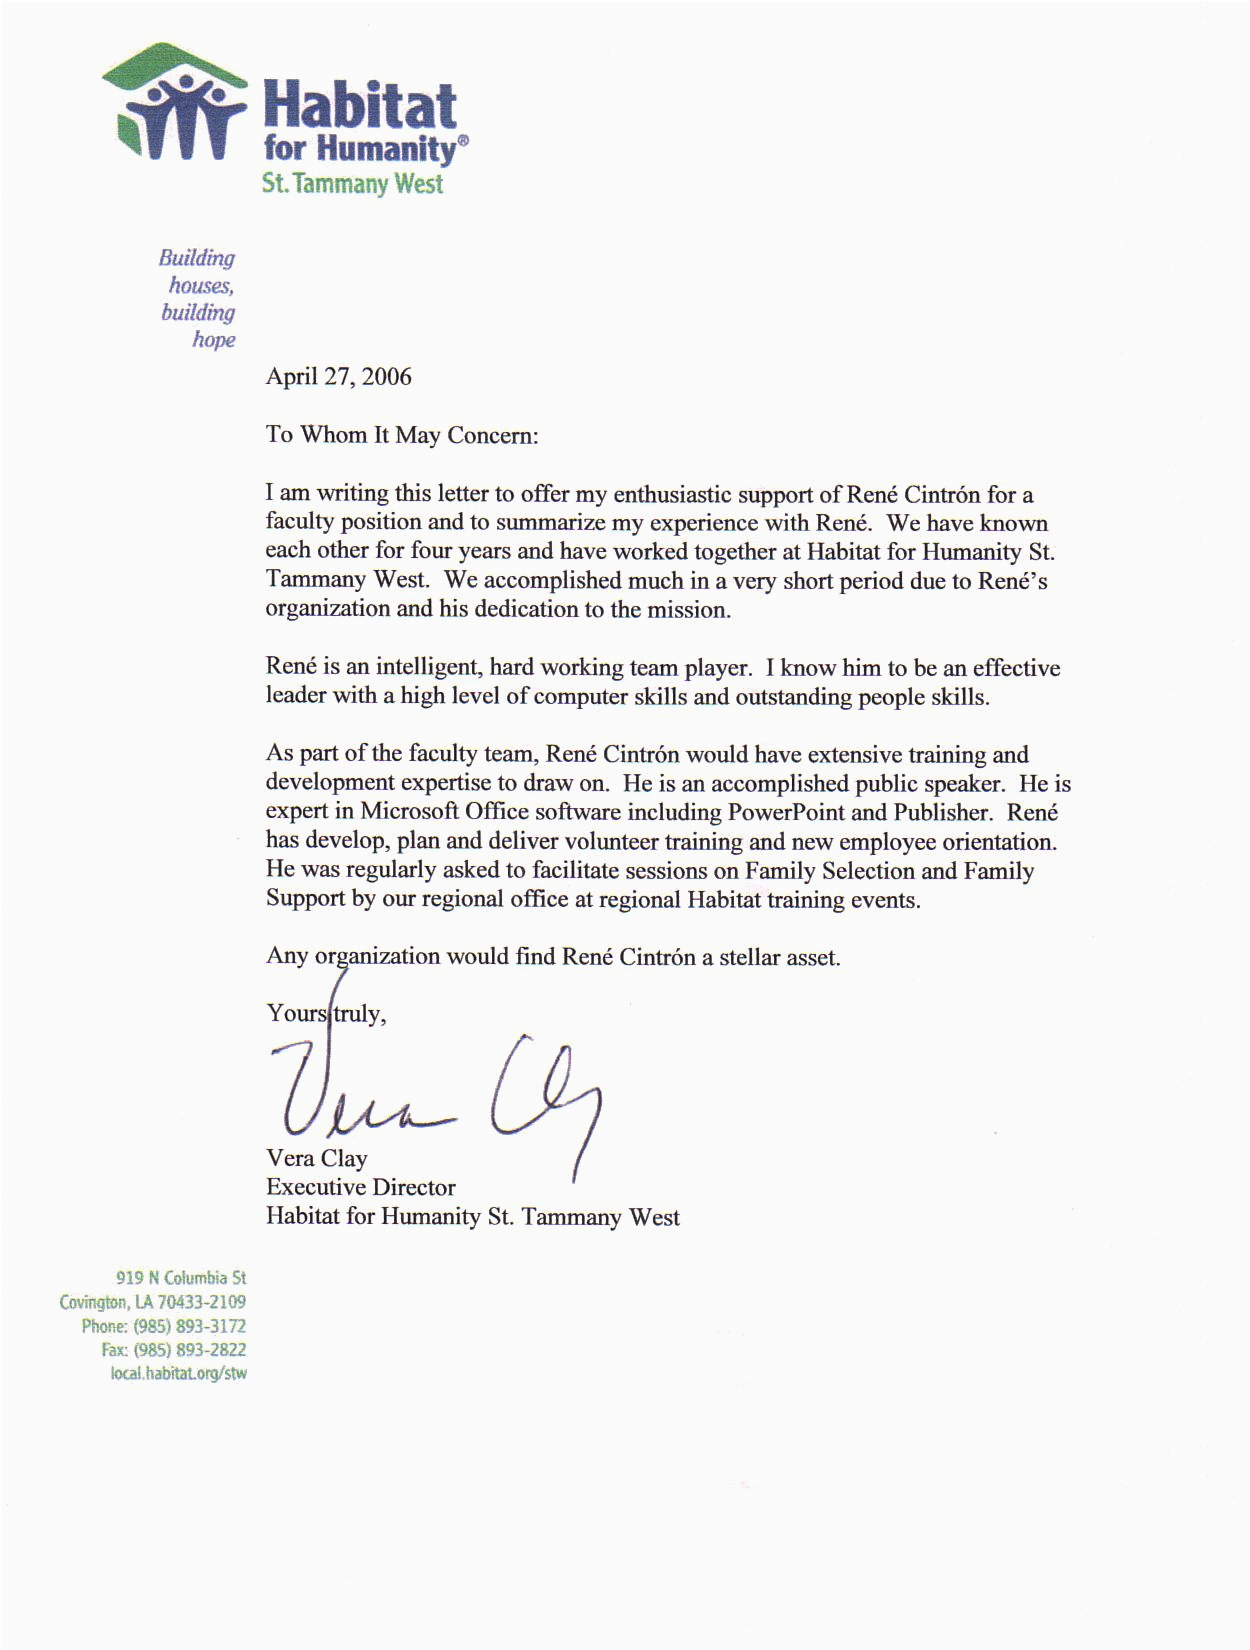 letter of re mendation template professional letter ofmendation template reference sample jos for